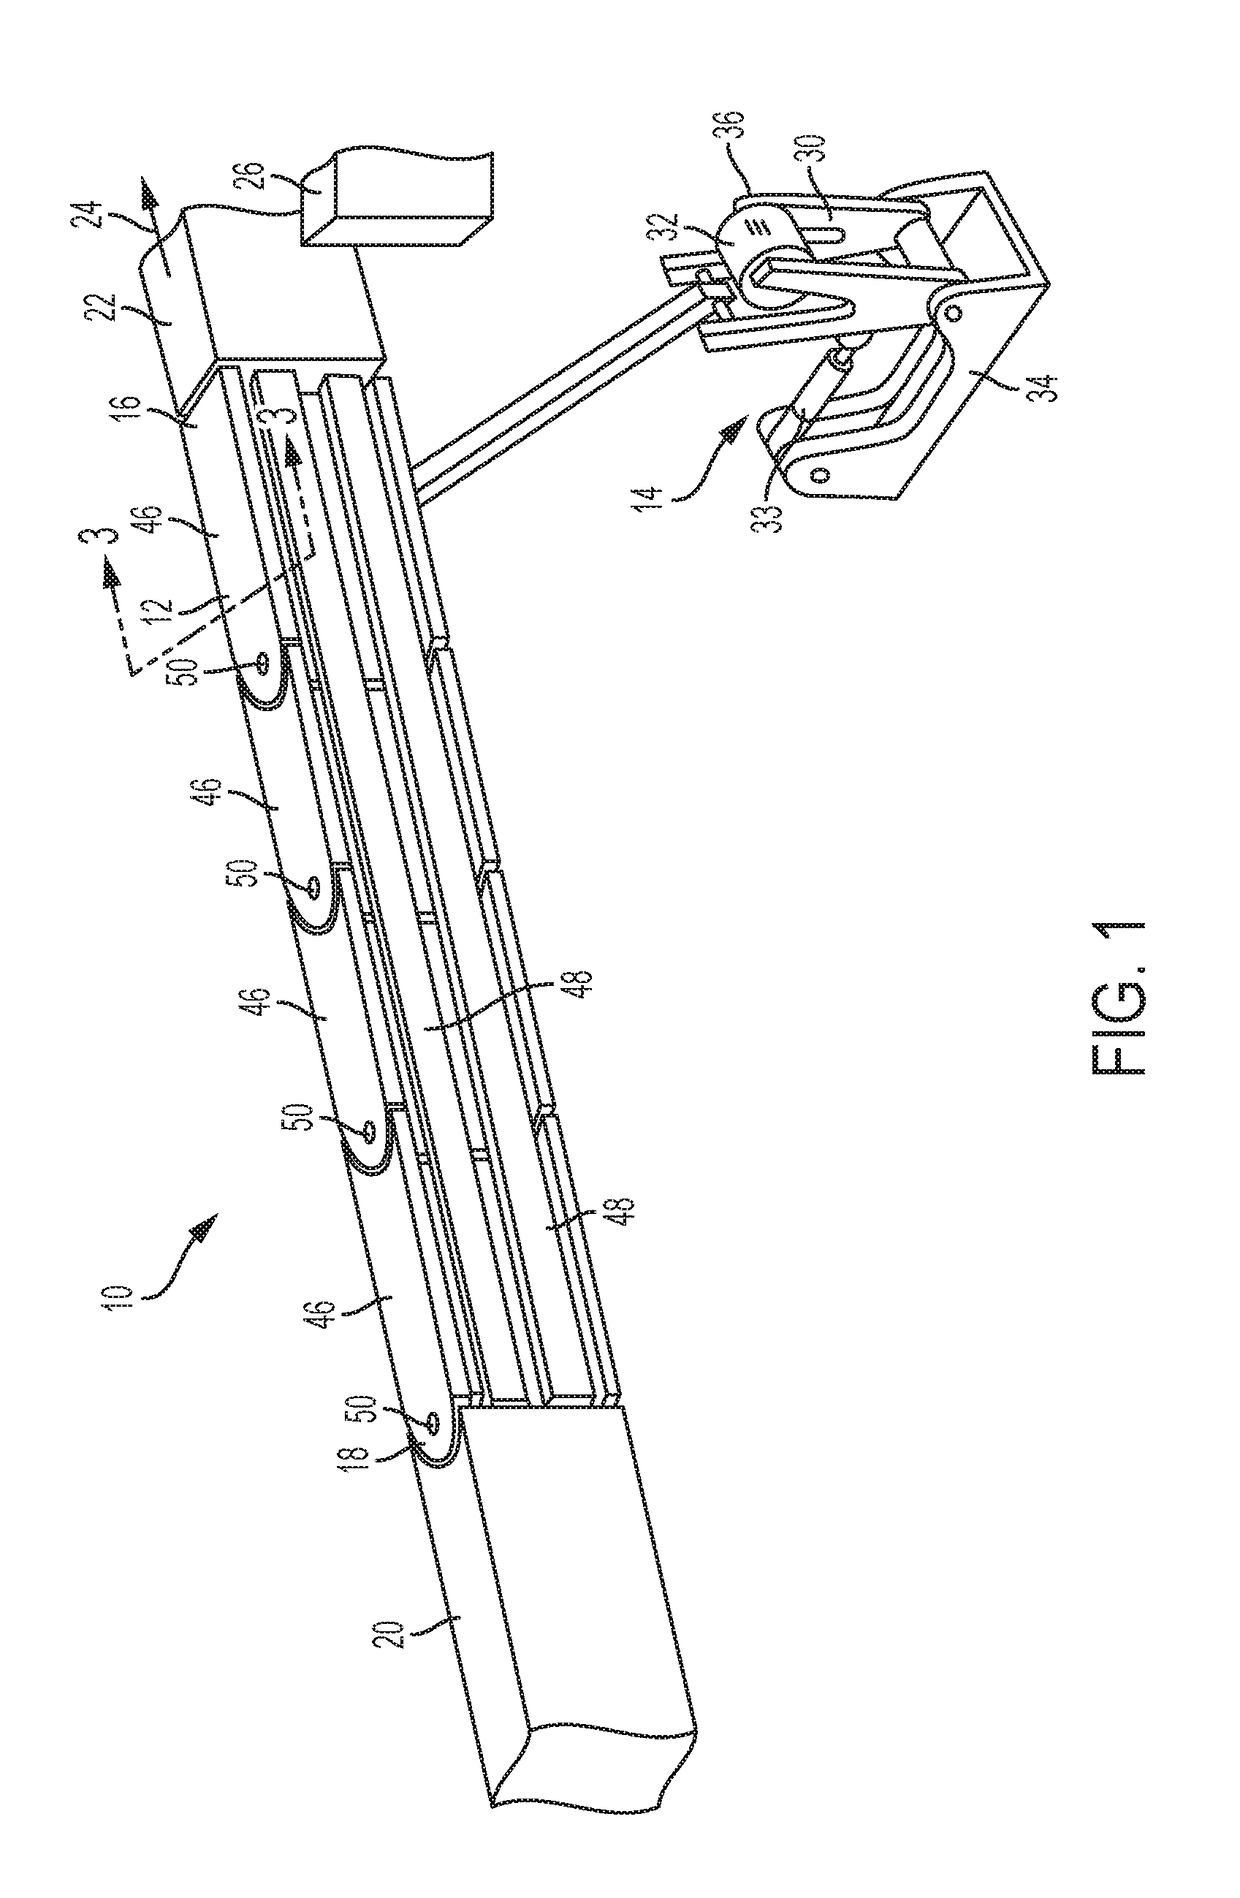 Monorail Switch Using a Gravity-Assisted Actuating Mechanism